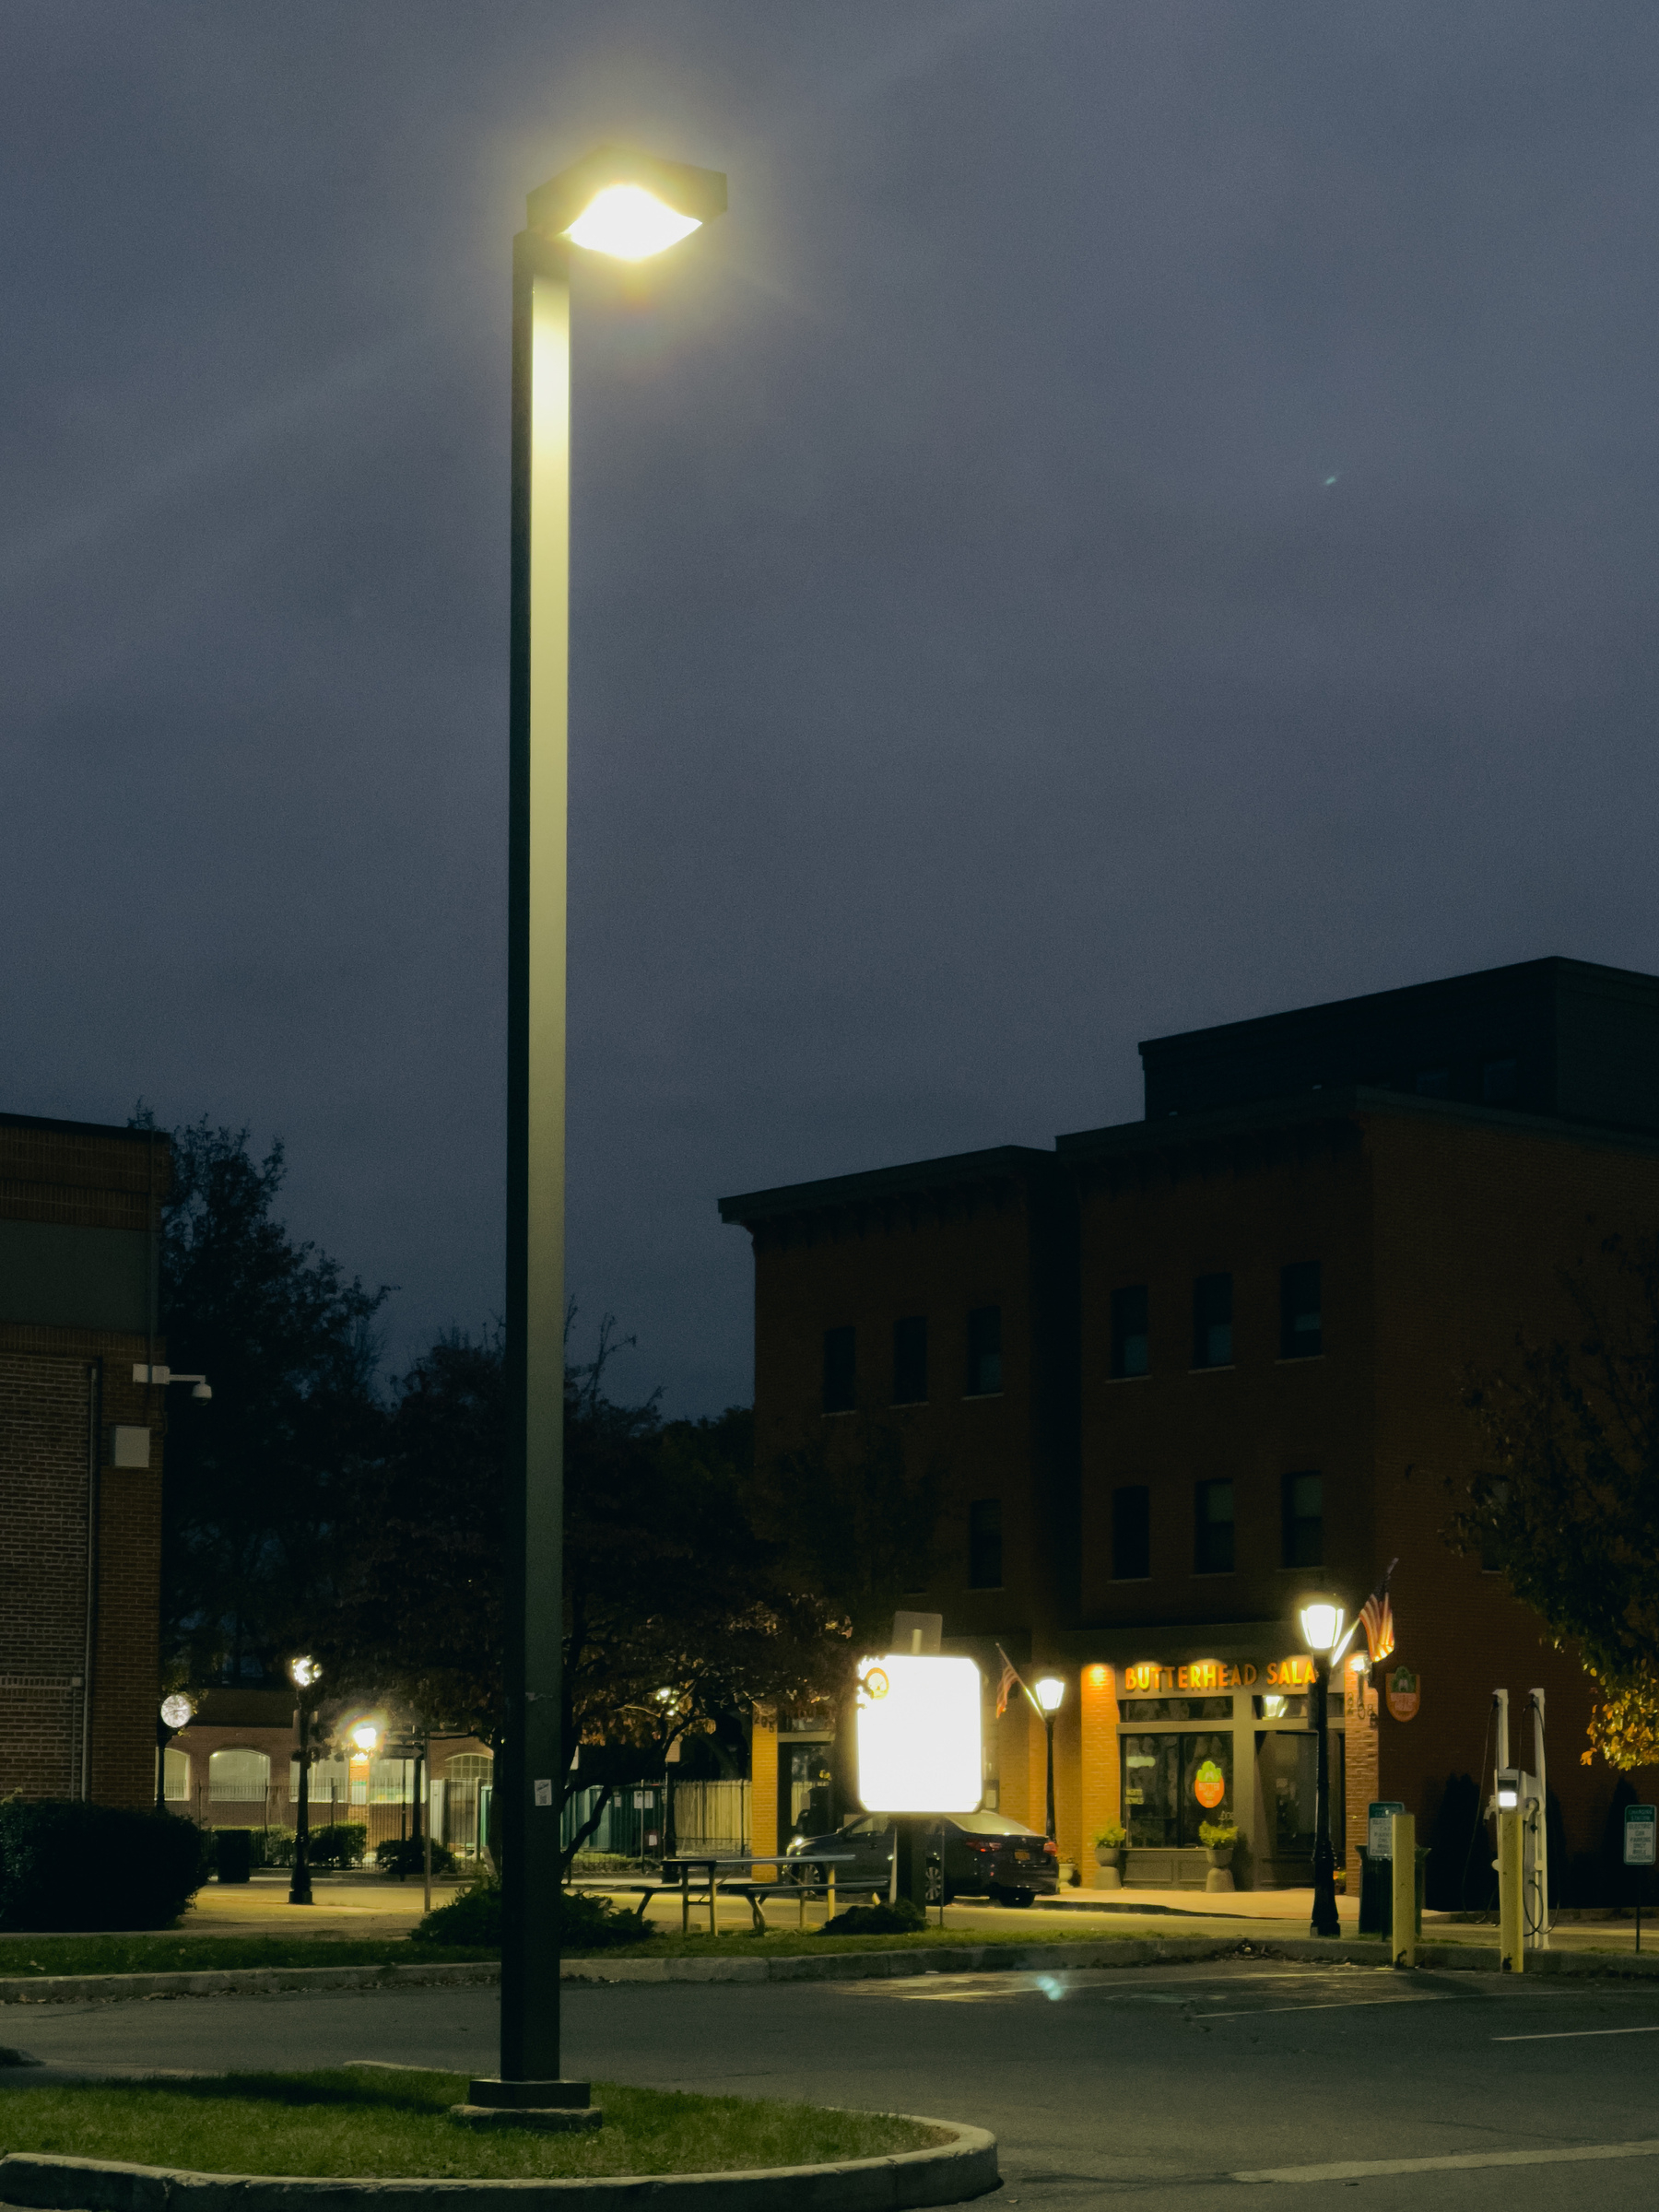 Streetlight in parking lot with silhouetted buildings in background and street lights illuminating ground floor of buildings and street, in background.